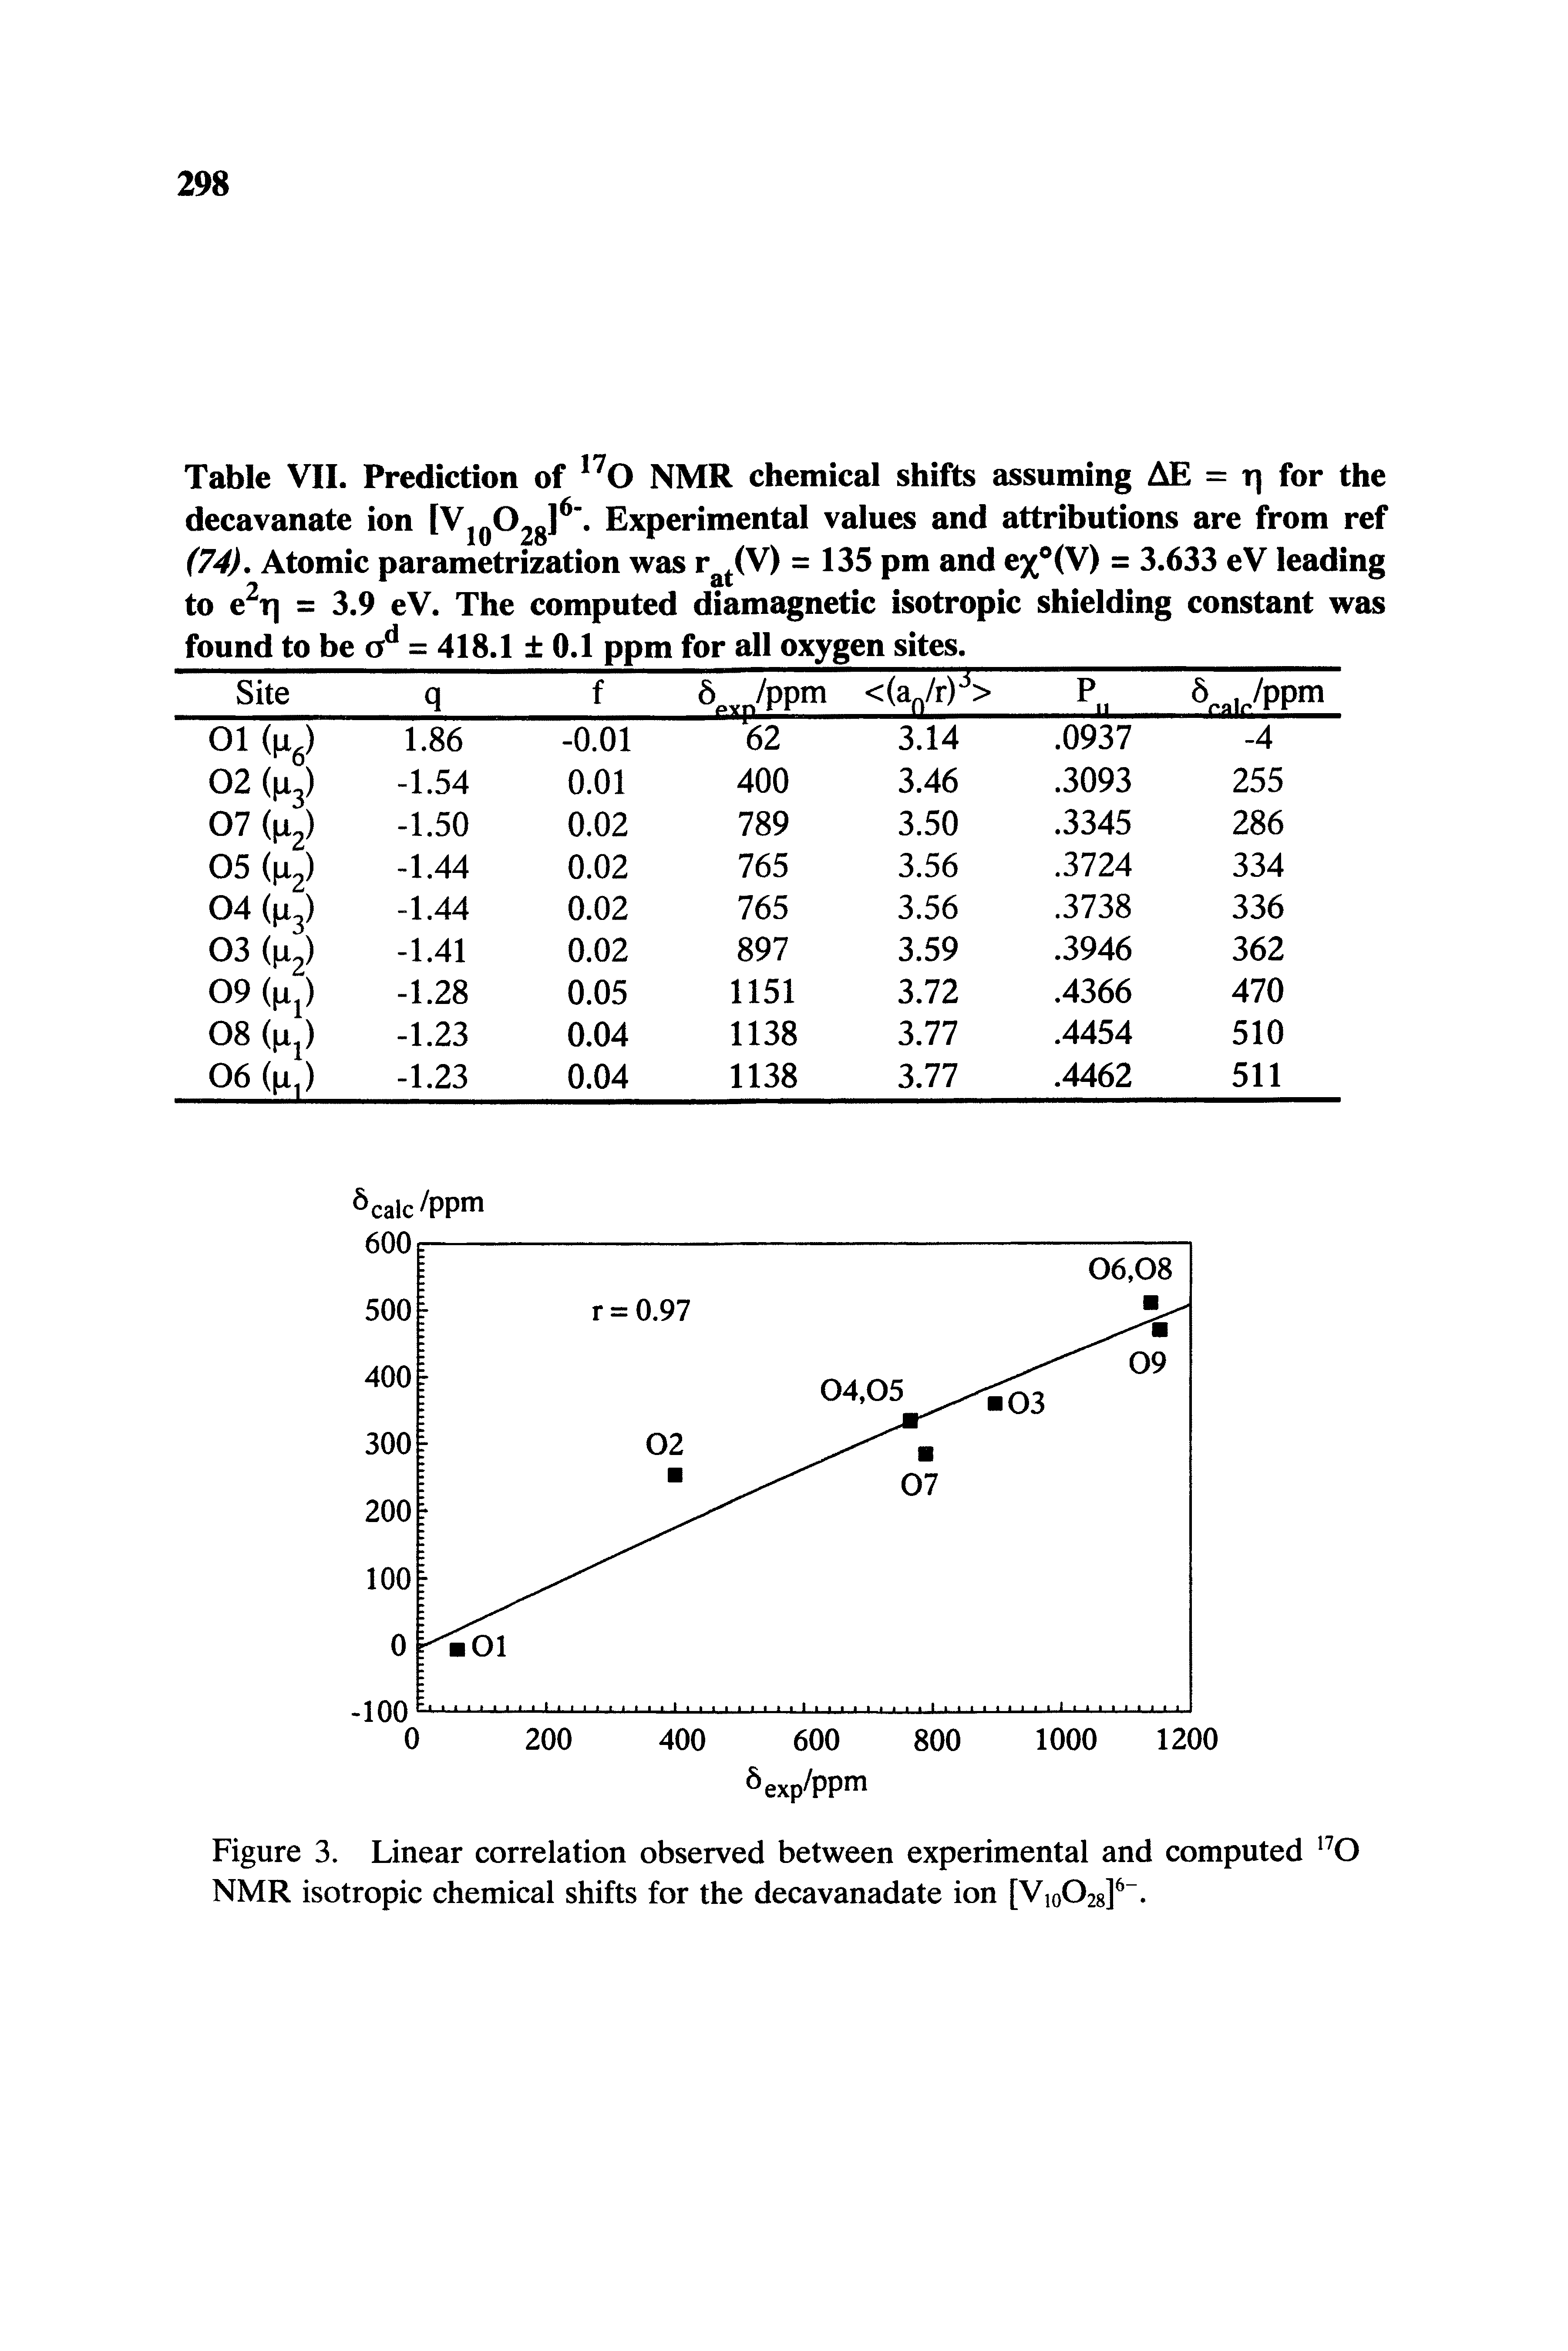 Table VII. Prediction of 170 NMR chemical shifts assuming AE = T for the decavanate ion [V10O28]6 Experimental values and attributions are from ref (74). Atomic parametrization was r t(V) = 135 pm and ex°(V) = 3.633 eV leading to e2t = 3.9 eV. The computed diamagnetic isotropic shielding constant was found to be ad = 418.1 0.1 ppm for all oxygen sites.